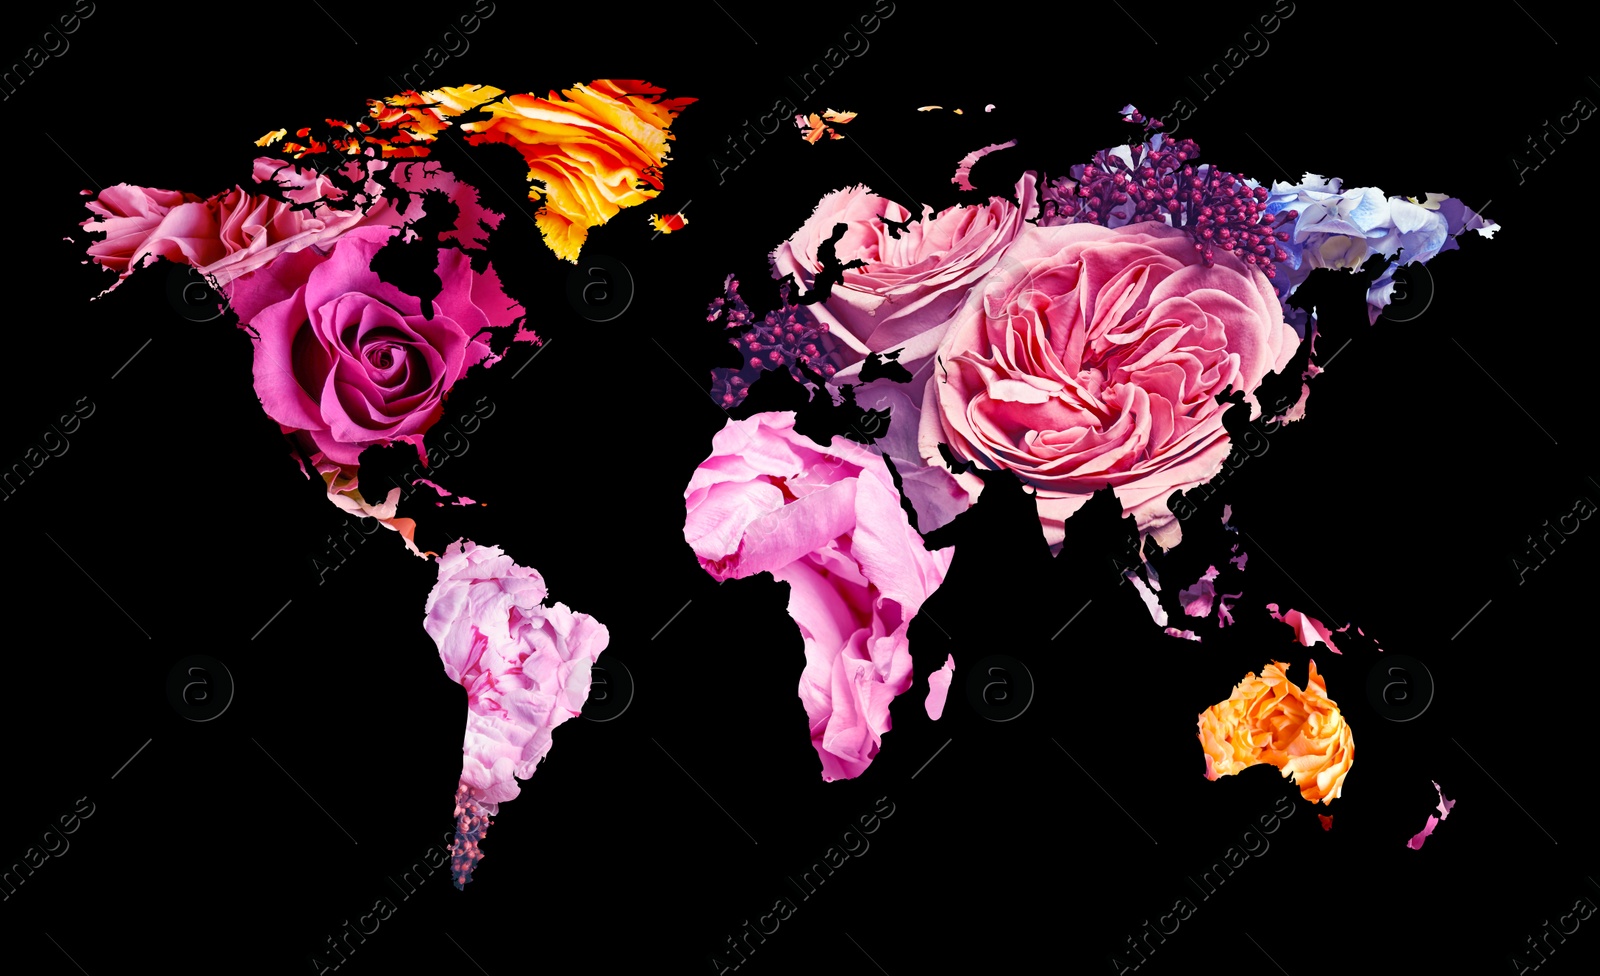 Image of World map made of beautiful flowers on black background, banner design